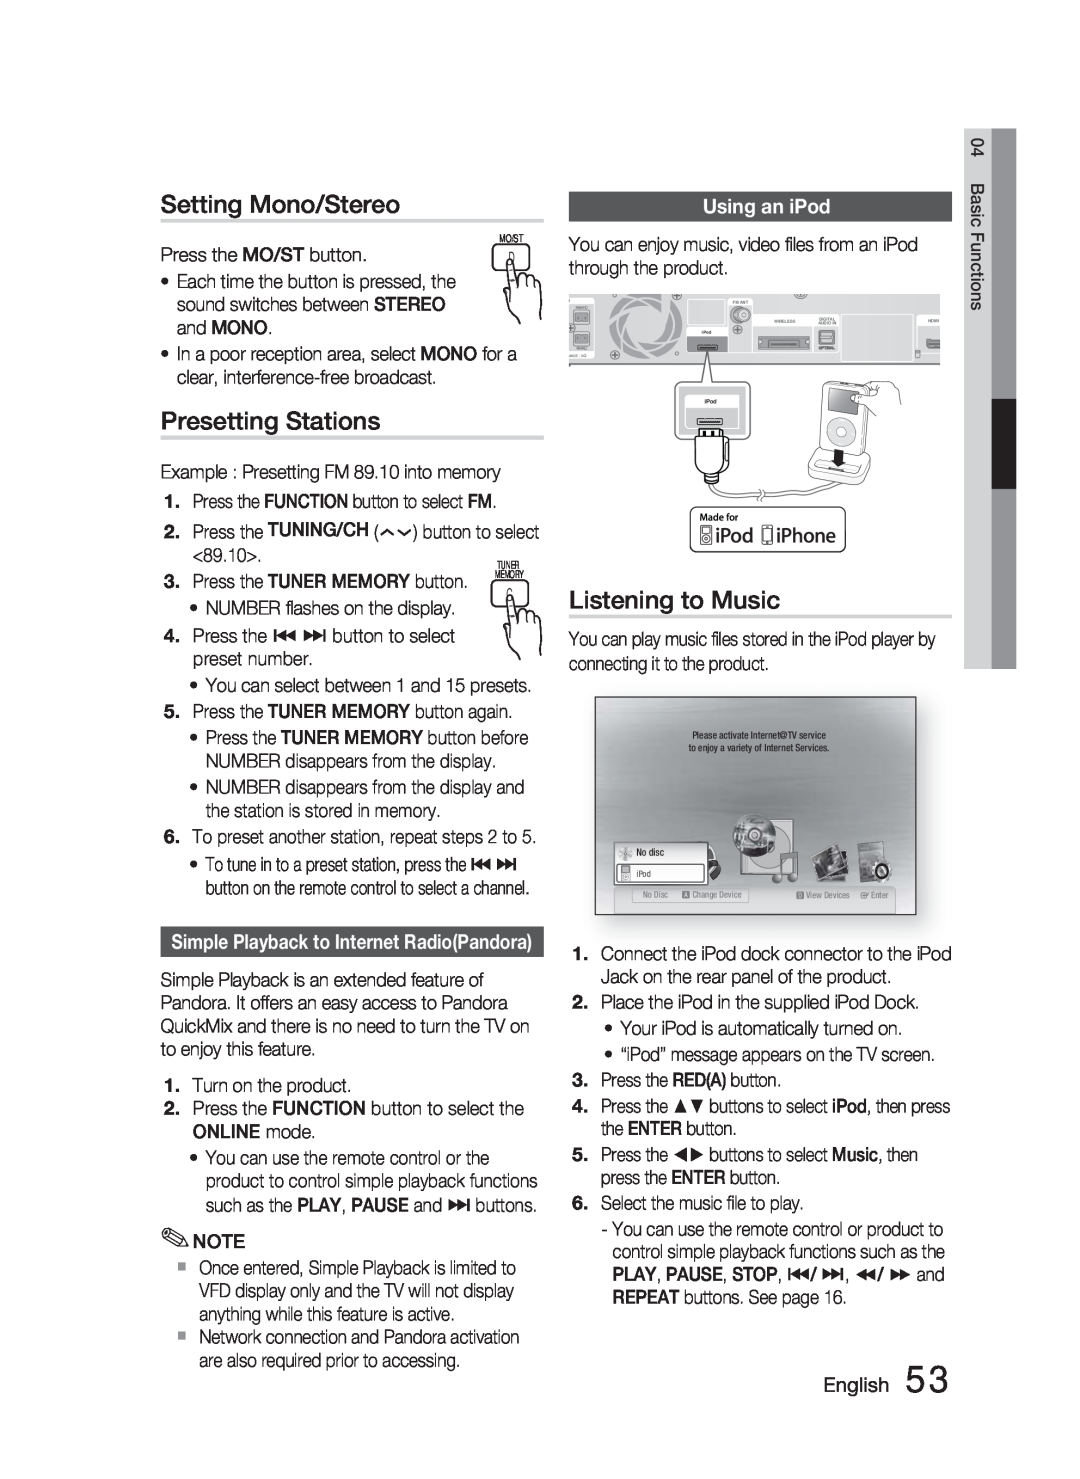 Samsung HT-C5500 user manual Setting Mono/Stereo, Presetting Stations, Listening to Music, Using an iPod, English 